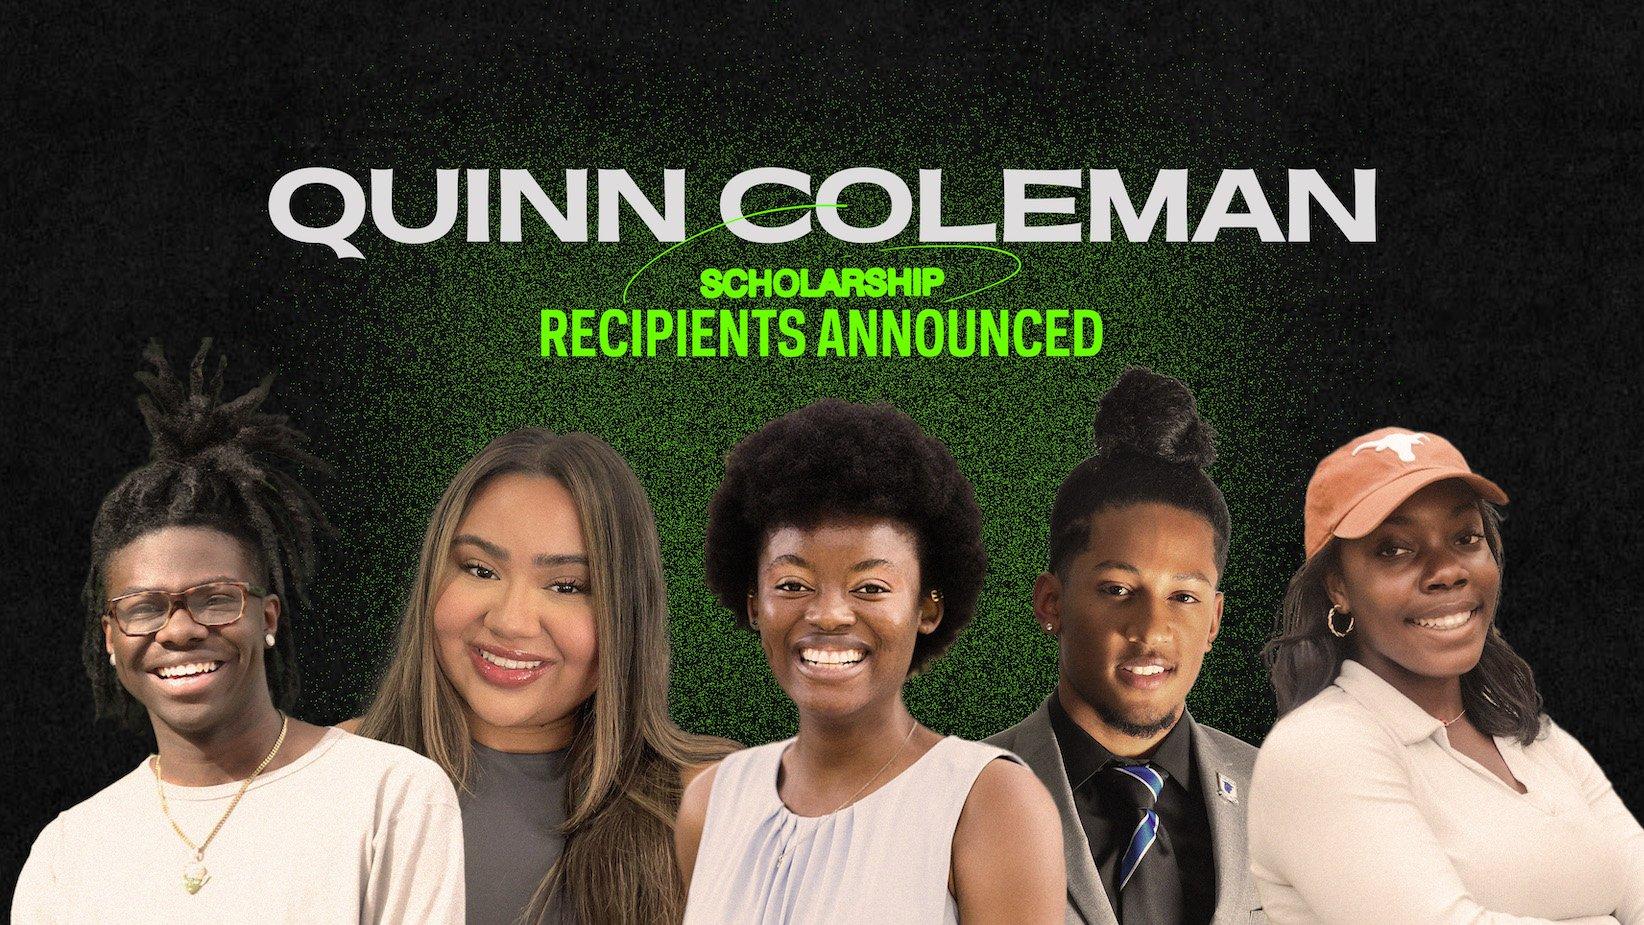 A graphic featuring a collage of images of the 2023 Quinn Coleman Memorial Scholarship Recipients (L-R) Dilan Hoskins, Aliyah Durazo, Olivia Moyana Pierce, Emmanuel Strickland, and Vashed Thompson